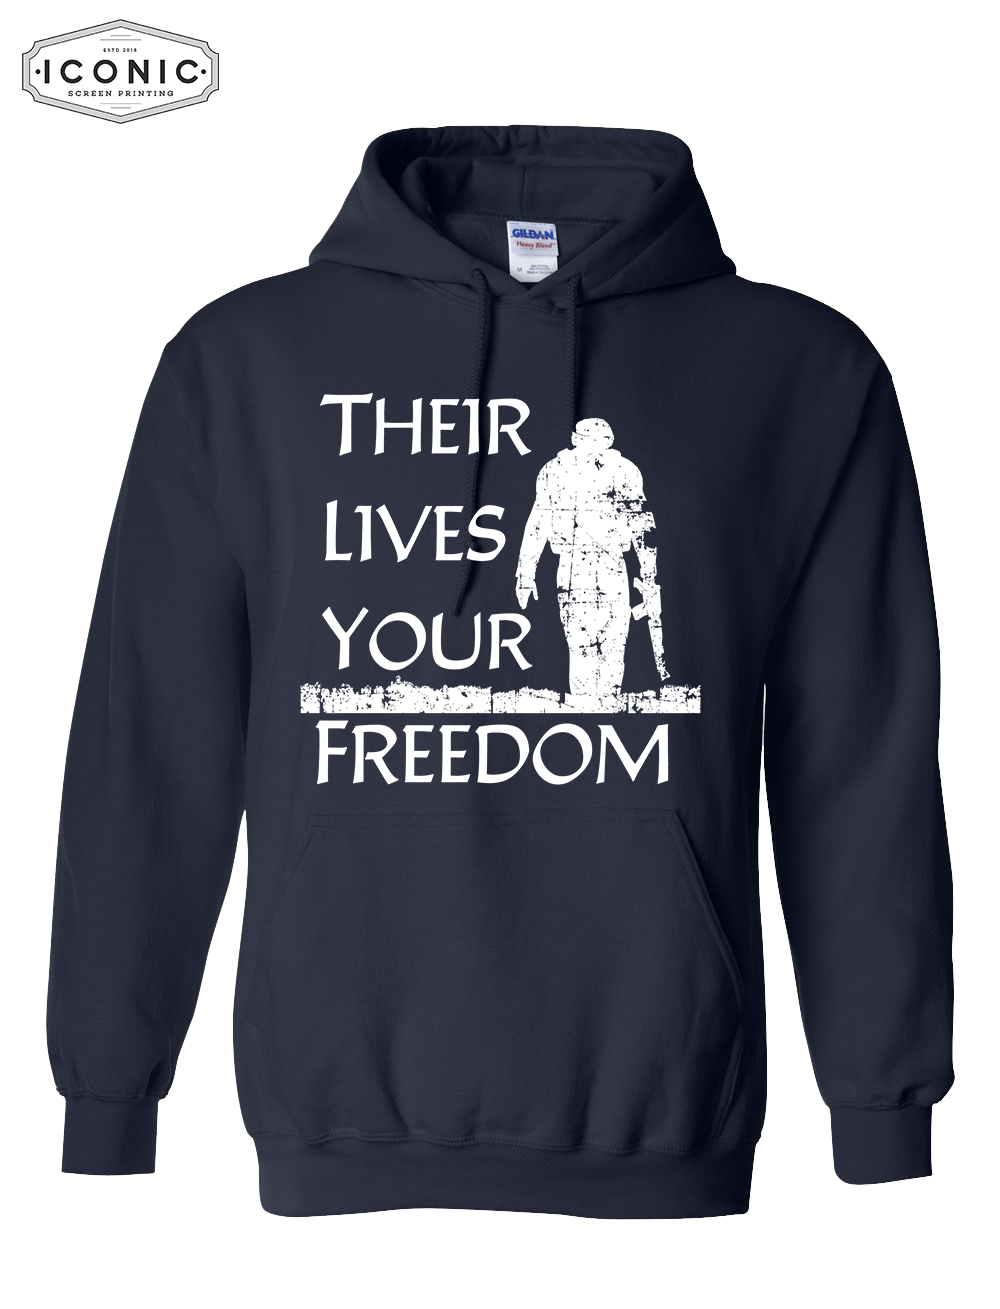 Their Lives Your Freedom - Heavy Blend Hooded Sweatshirt